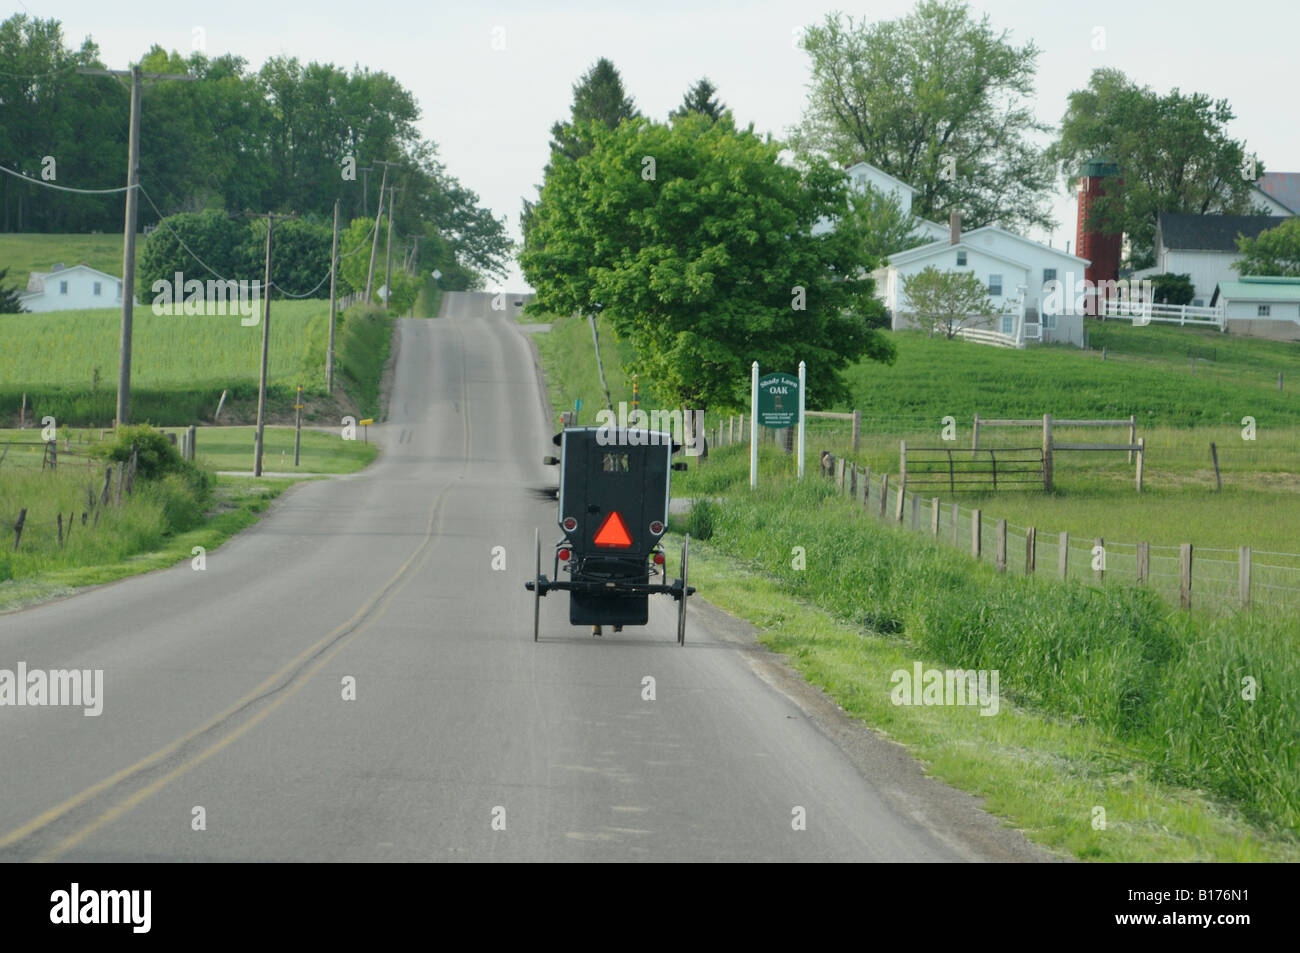 Amish buggy in country scene Stock Photo